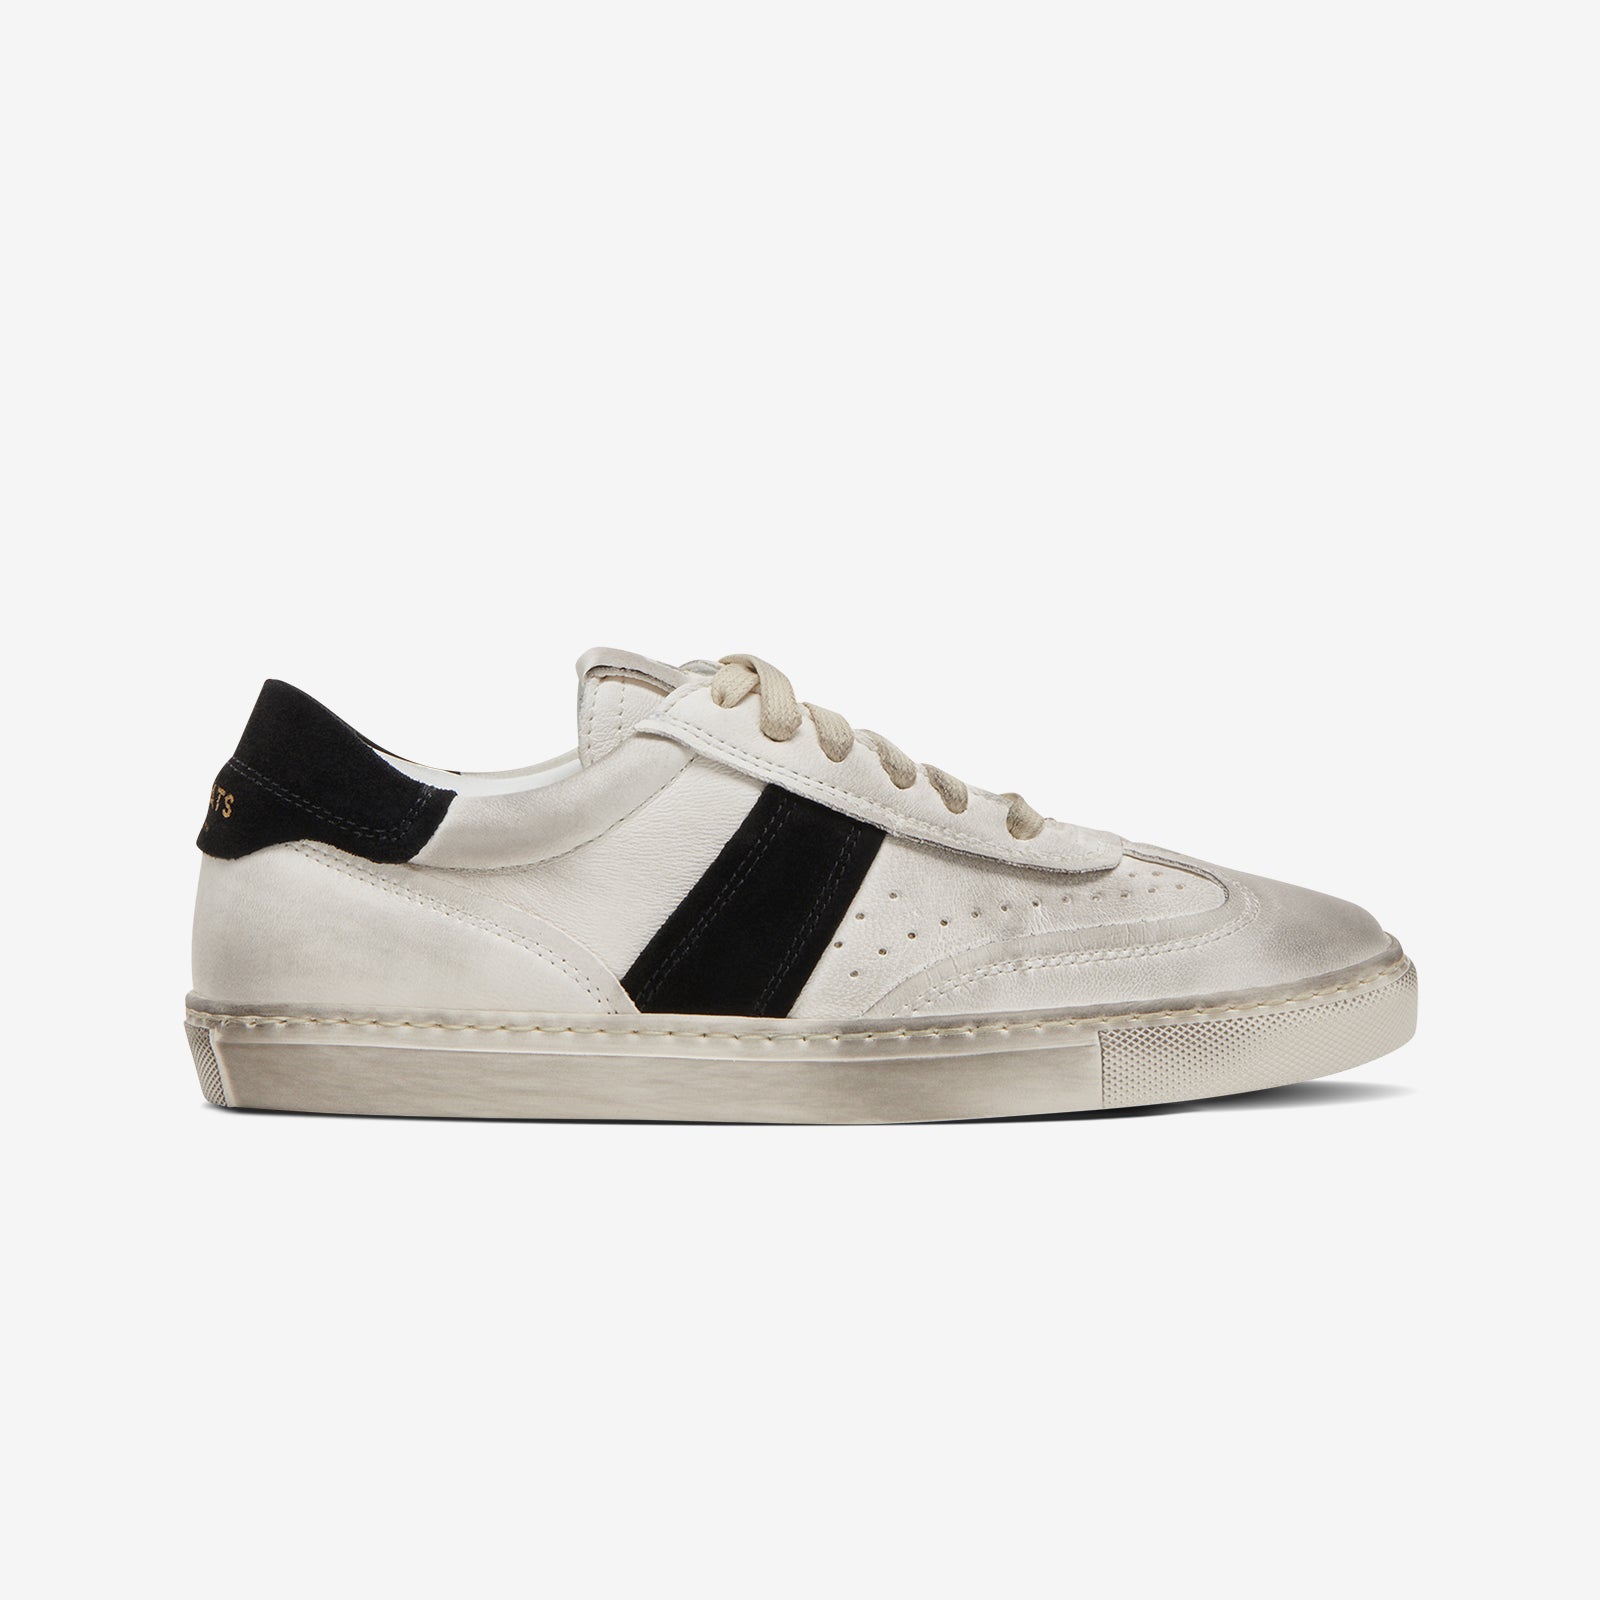 Greats - The Charlie Distressed - White/Black - Women's Shoe – GREATS